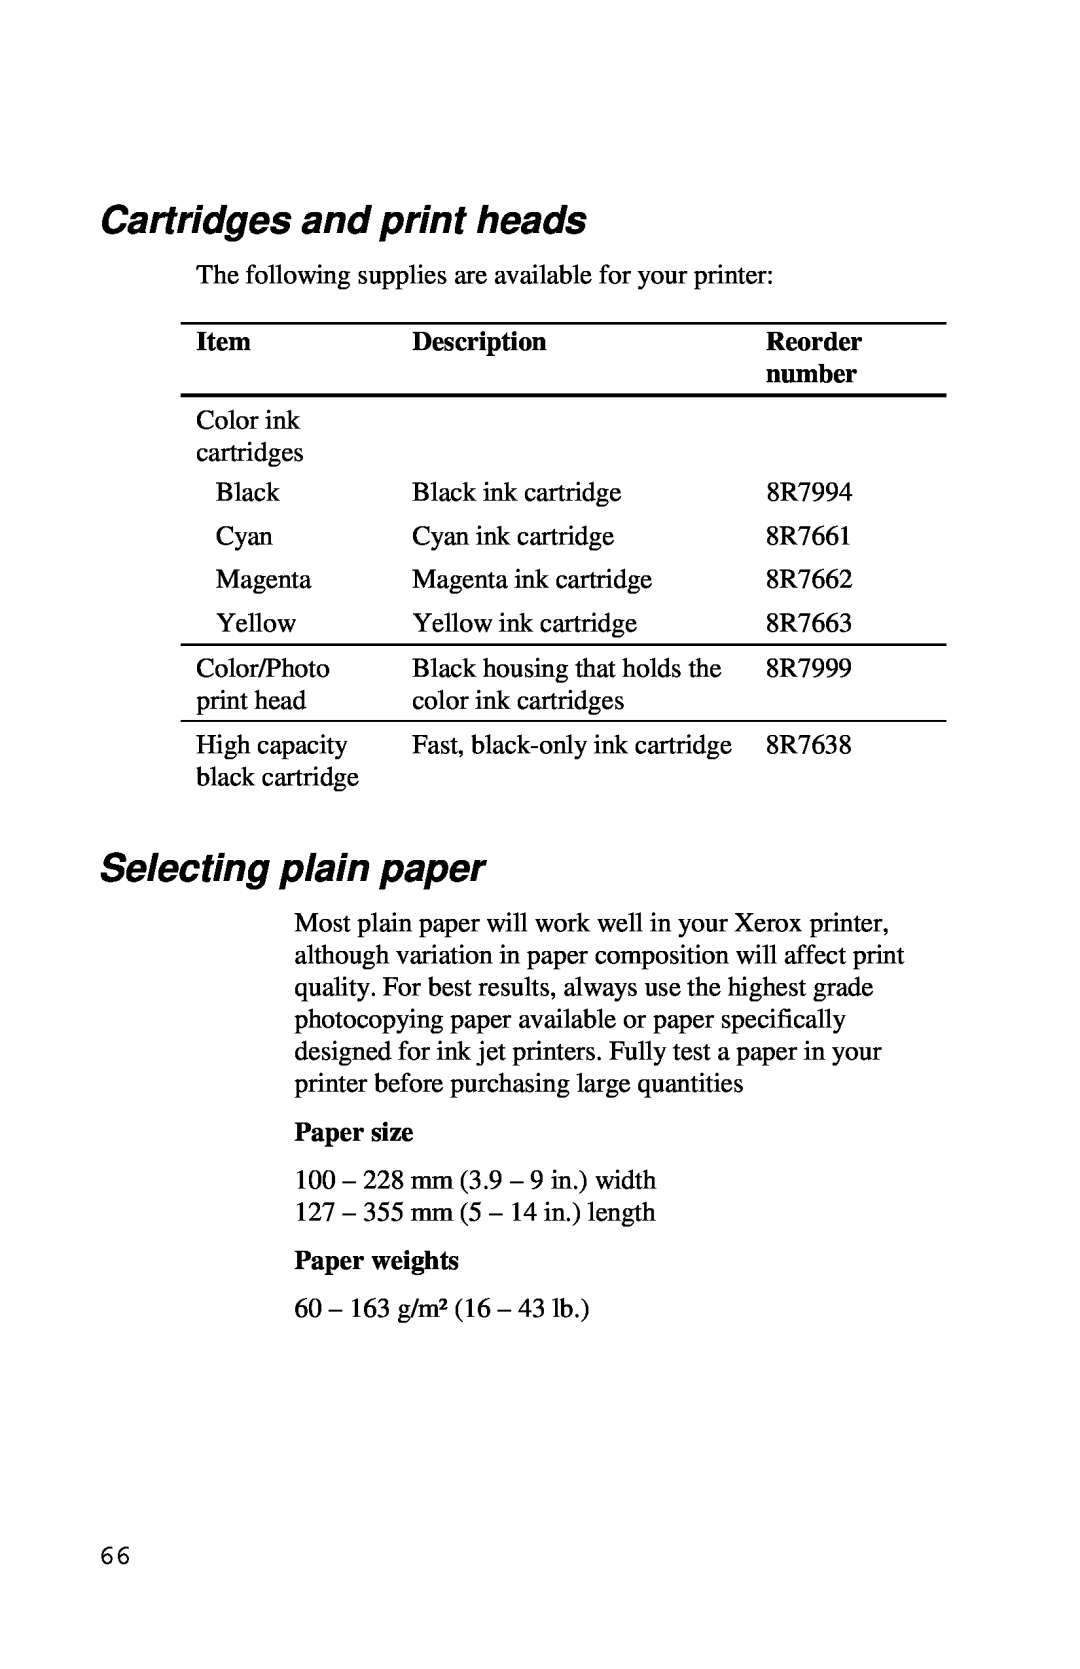 Xerox Inkjet Printer manual Cartridges and print heads, Selecting plain paper, Description, Reorder, number, Paper weights 